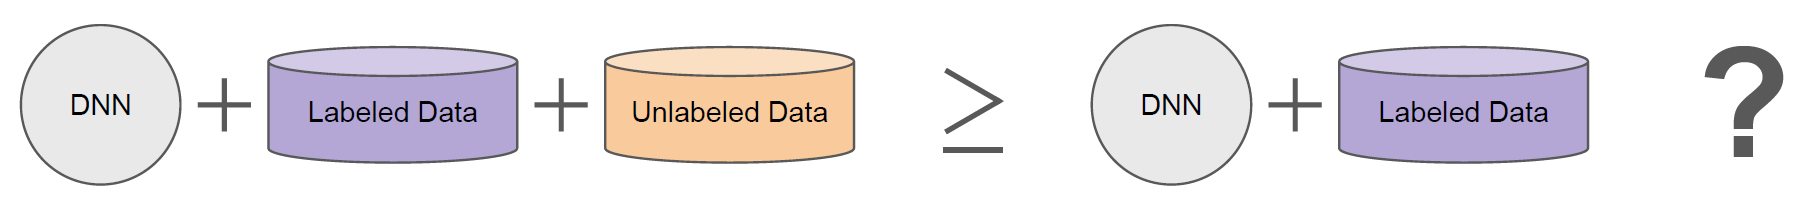 Image 1 is a diagram of the trained model with additional data that is unlabeled. From left to right: DNN plus labeled data plus unlabeled data, greater than symbol, DNN plus labeled data. Question mark. 